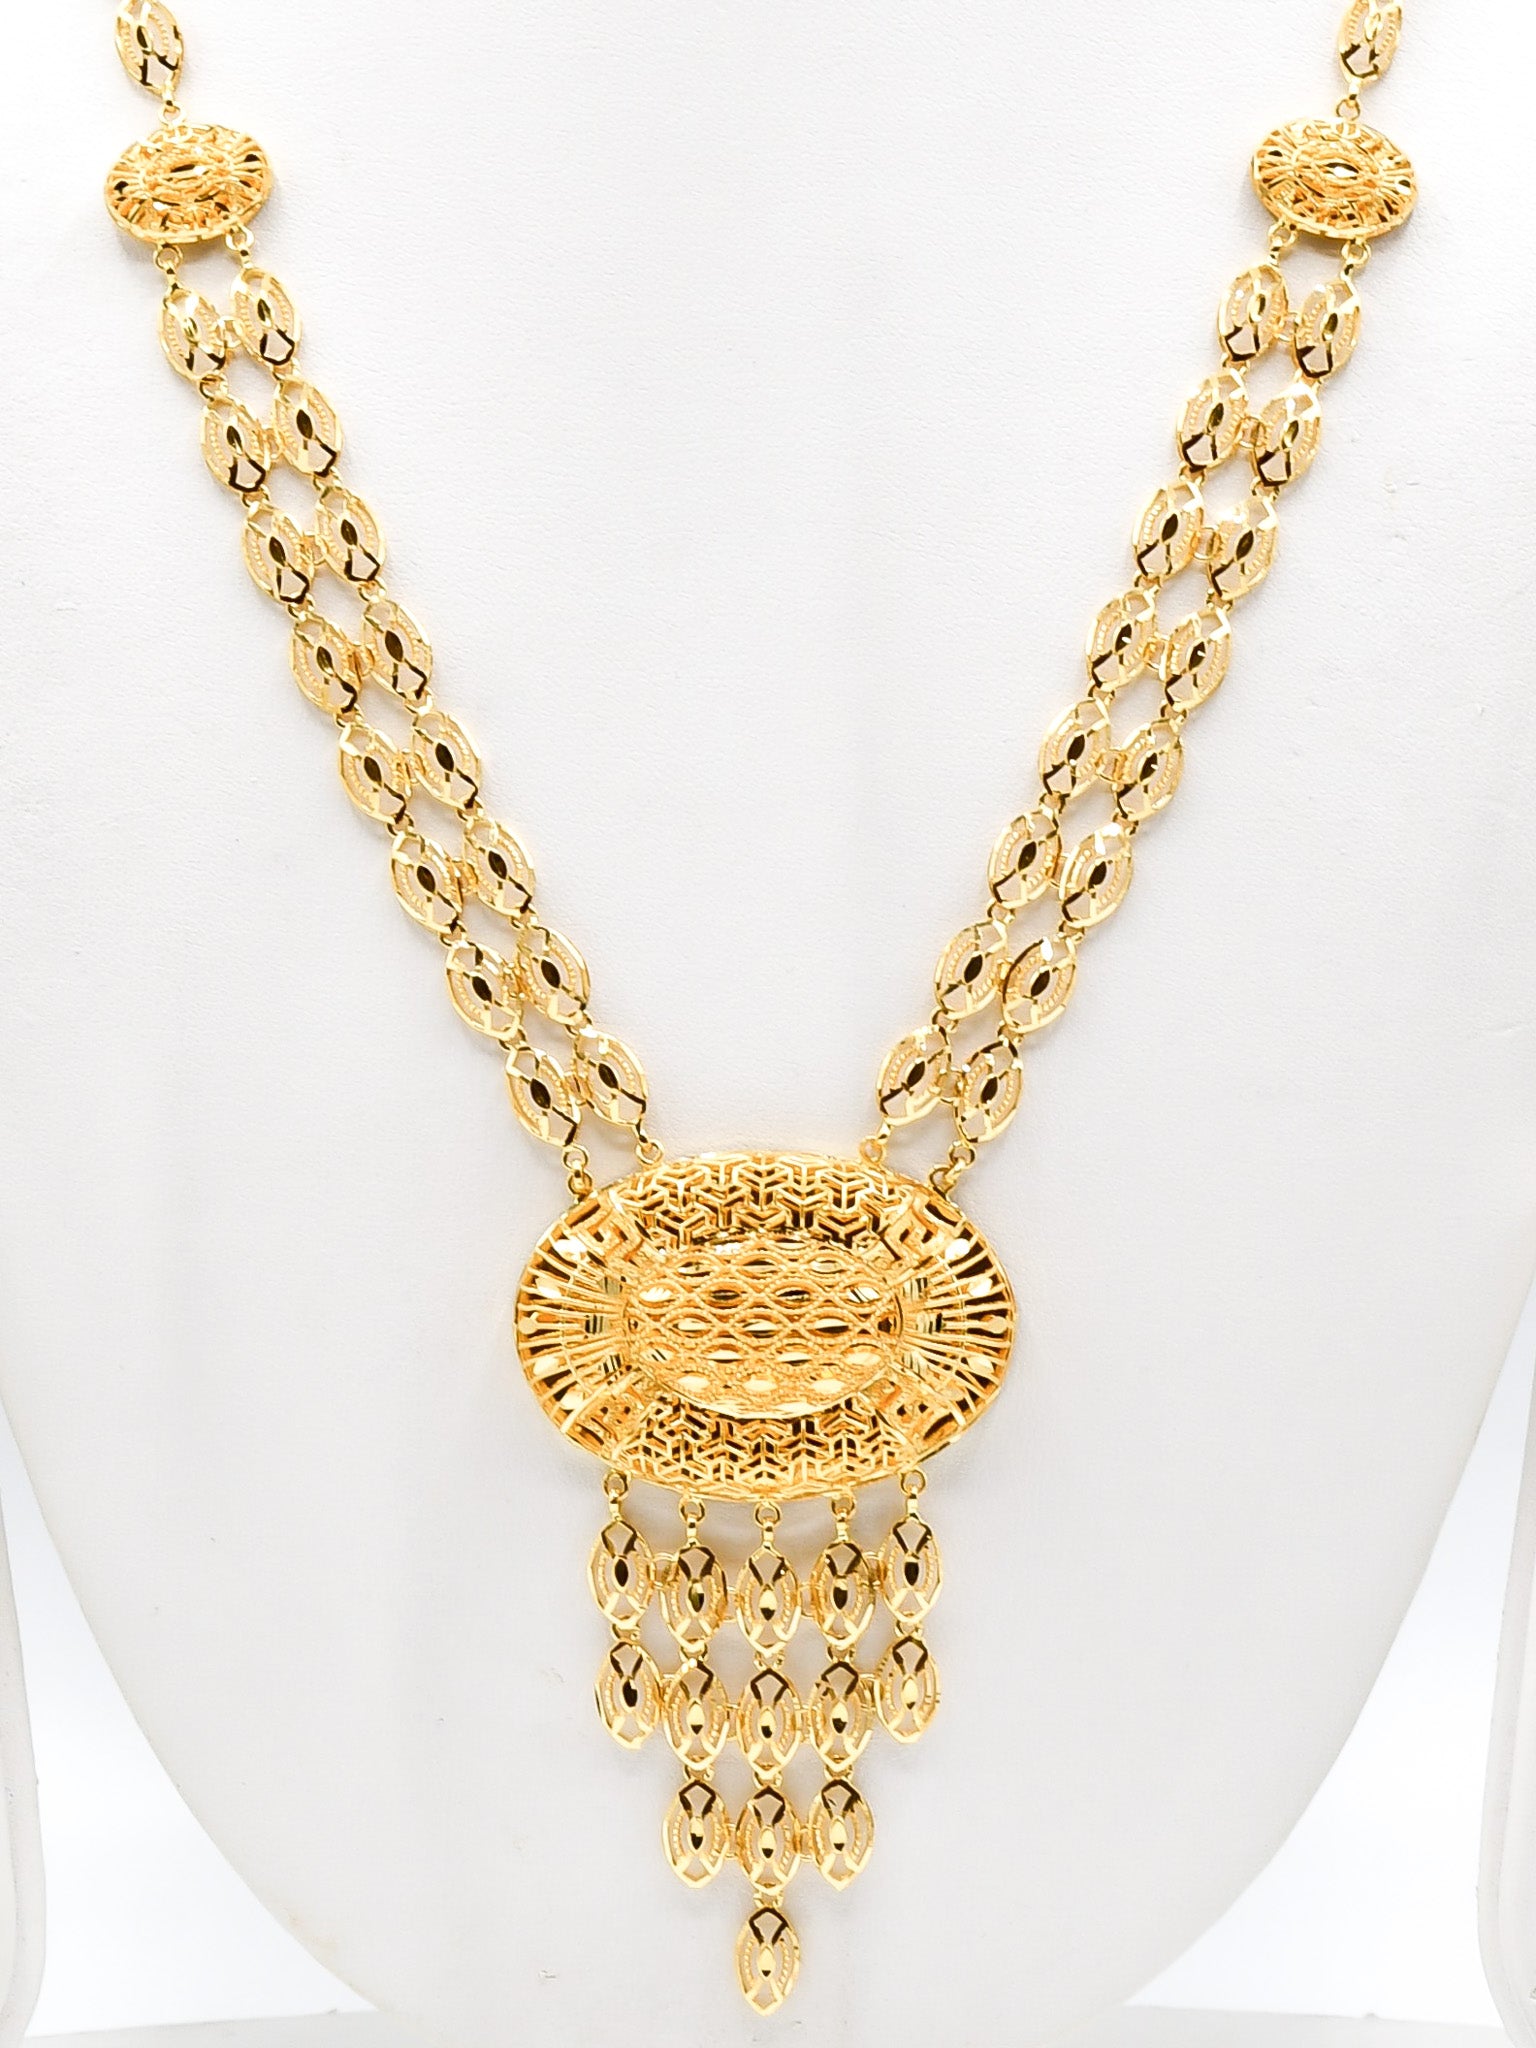 22ct Gold Long Necklace Set - Roop Darshan